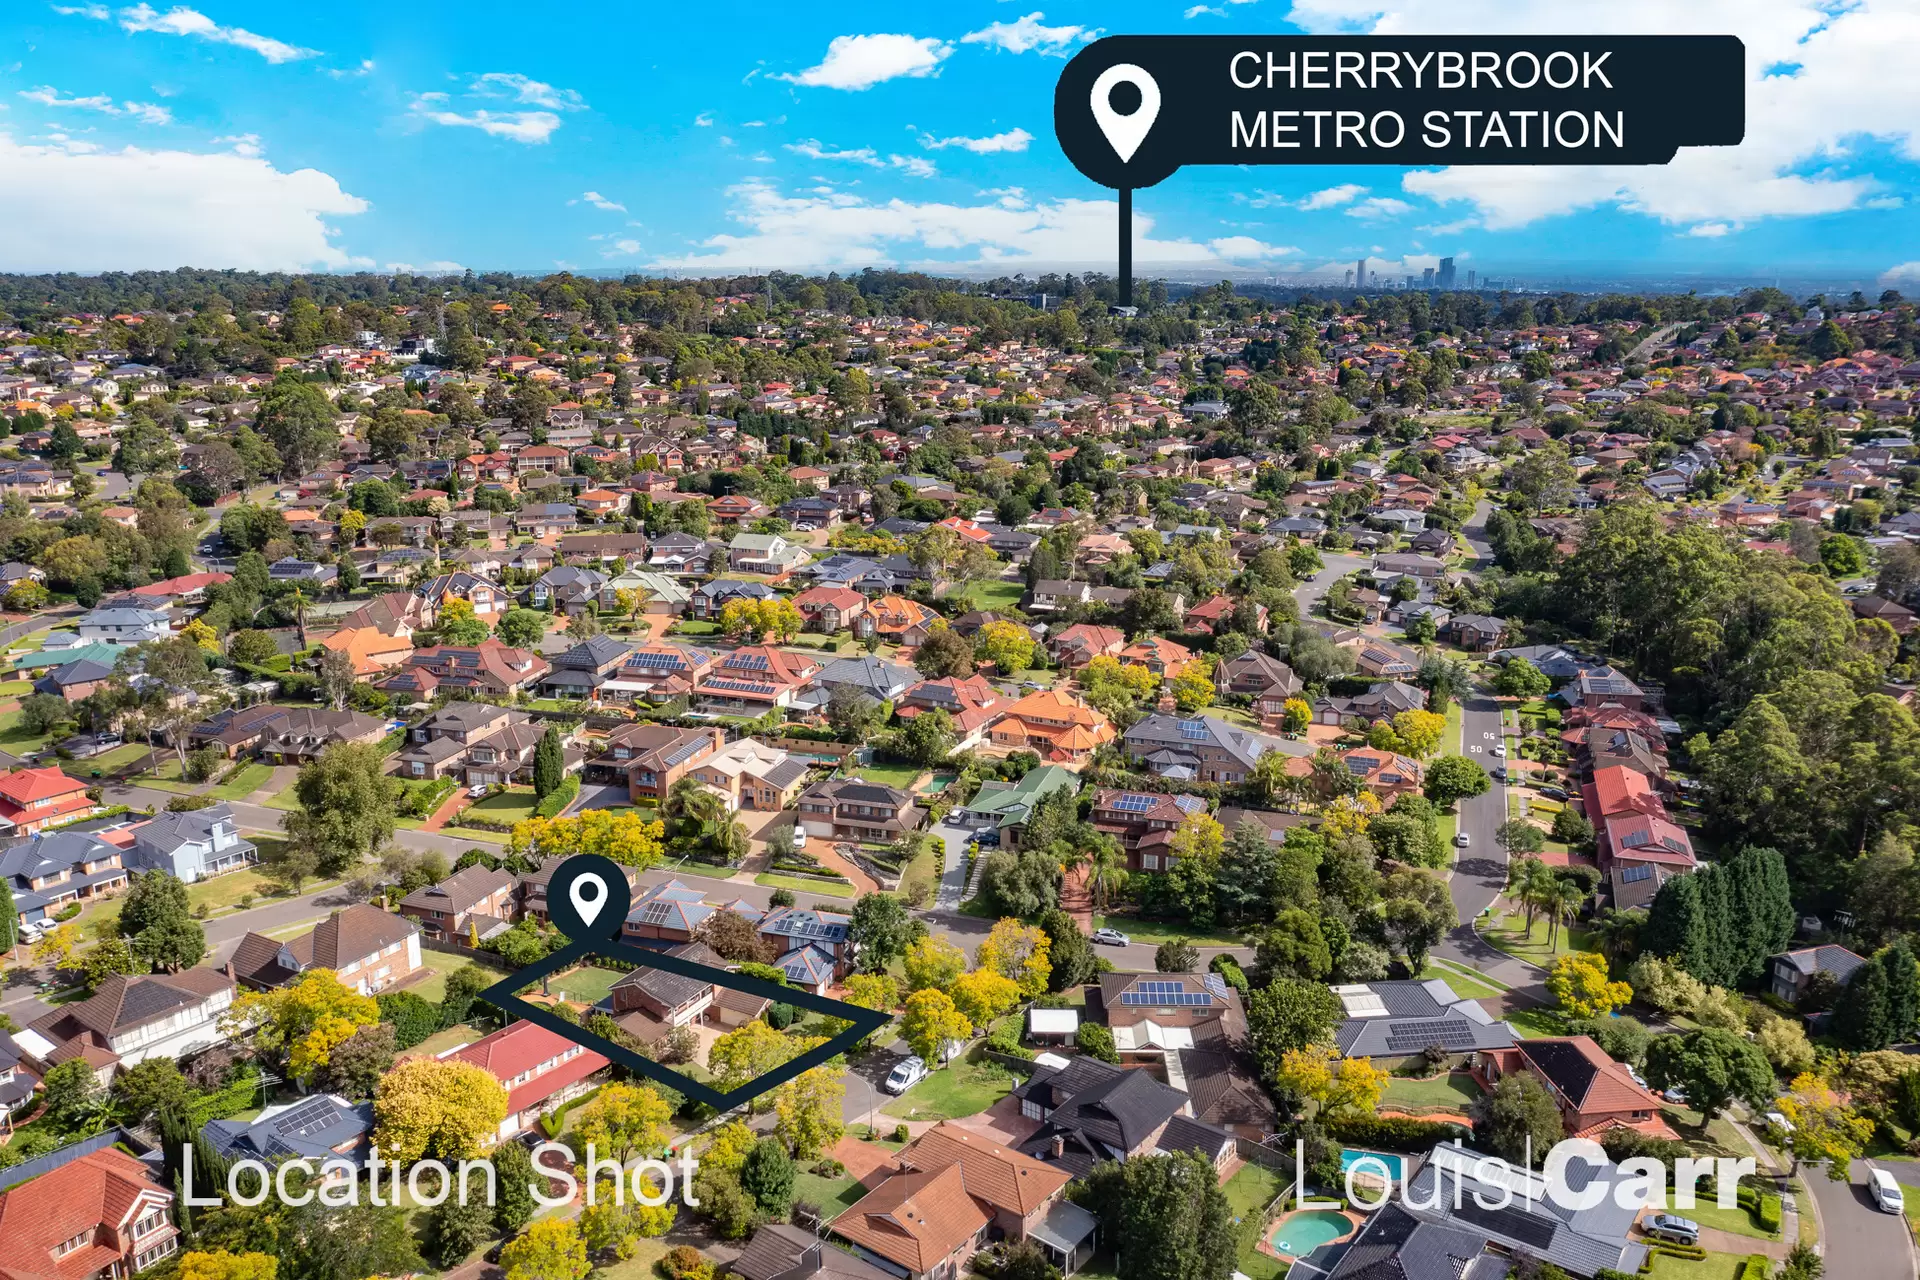 Photo #16: 4 Bowen Close, Cherrybrook - Sold by Louis Carr Real Estate